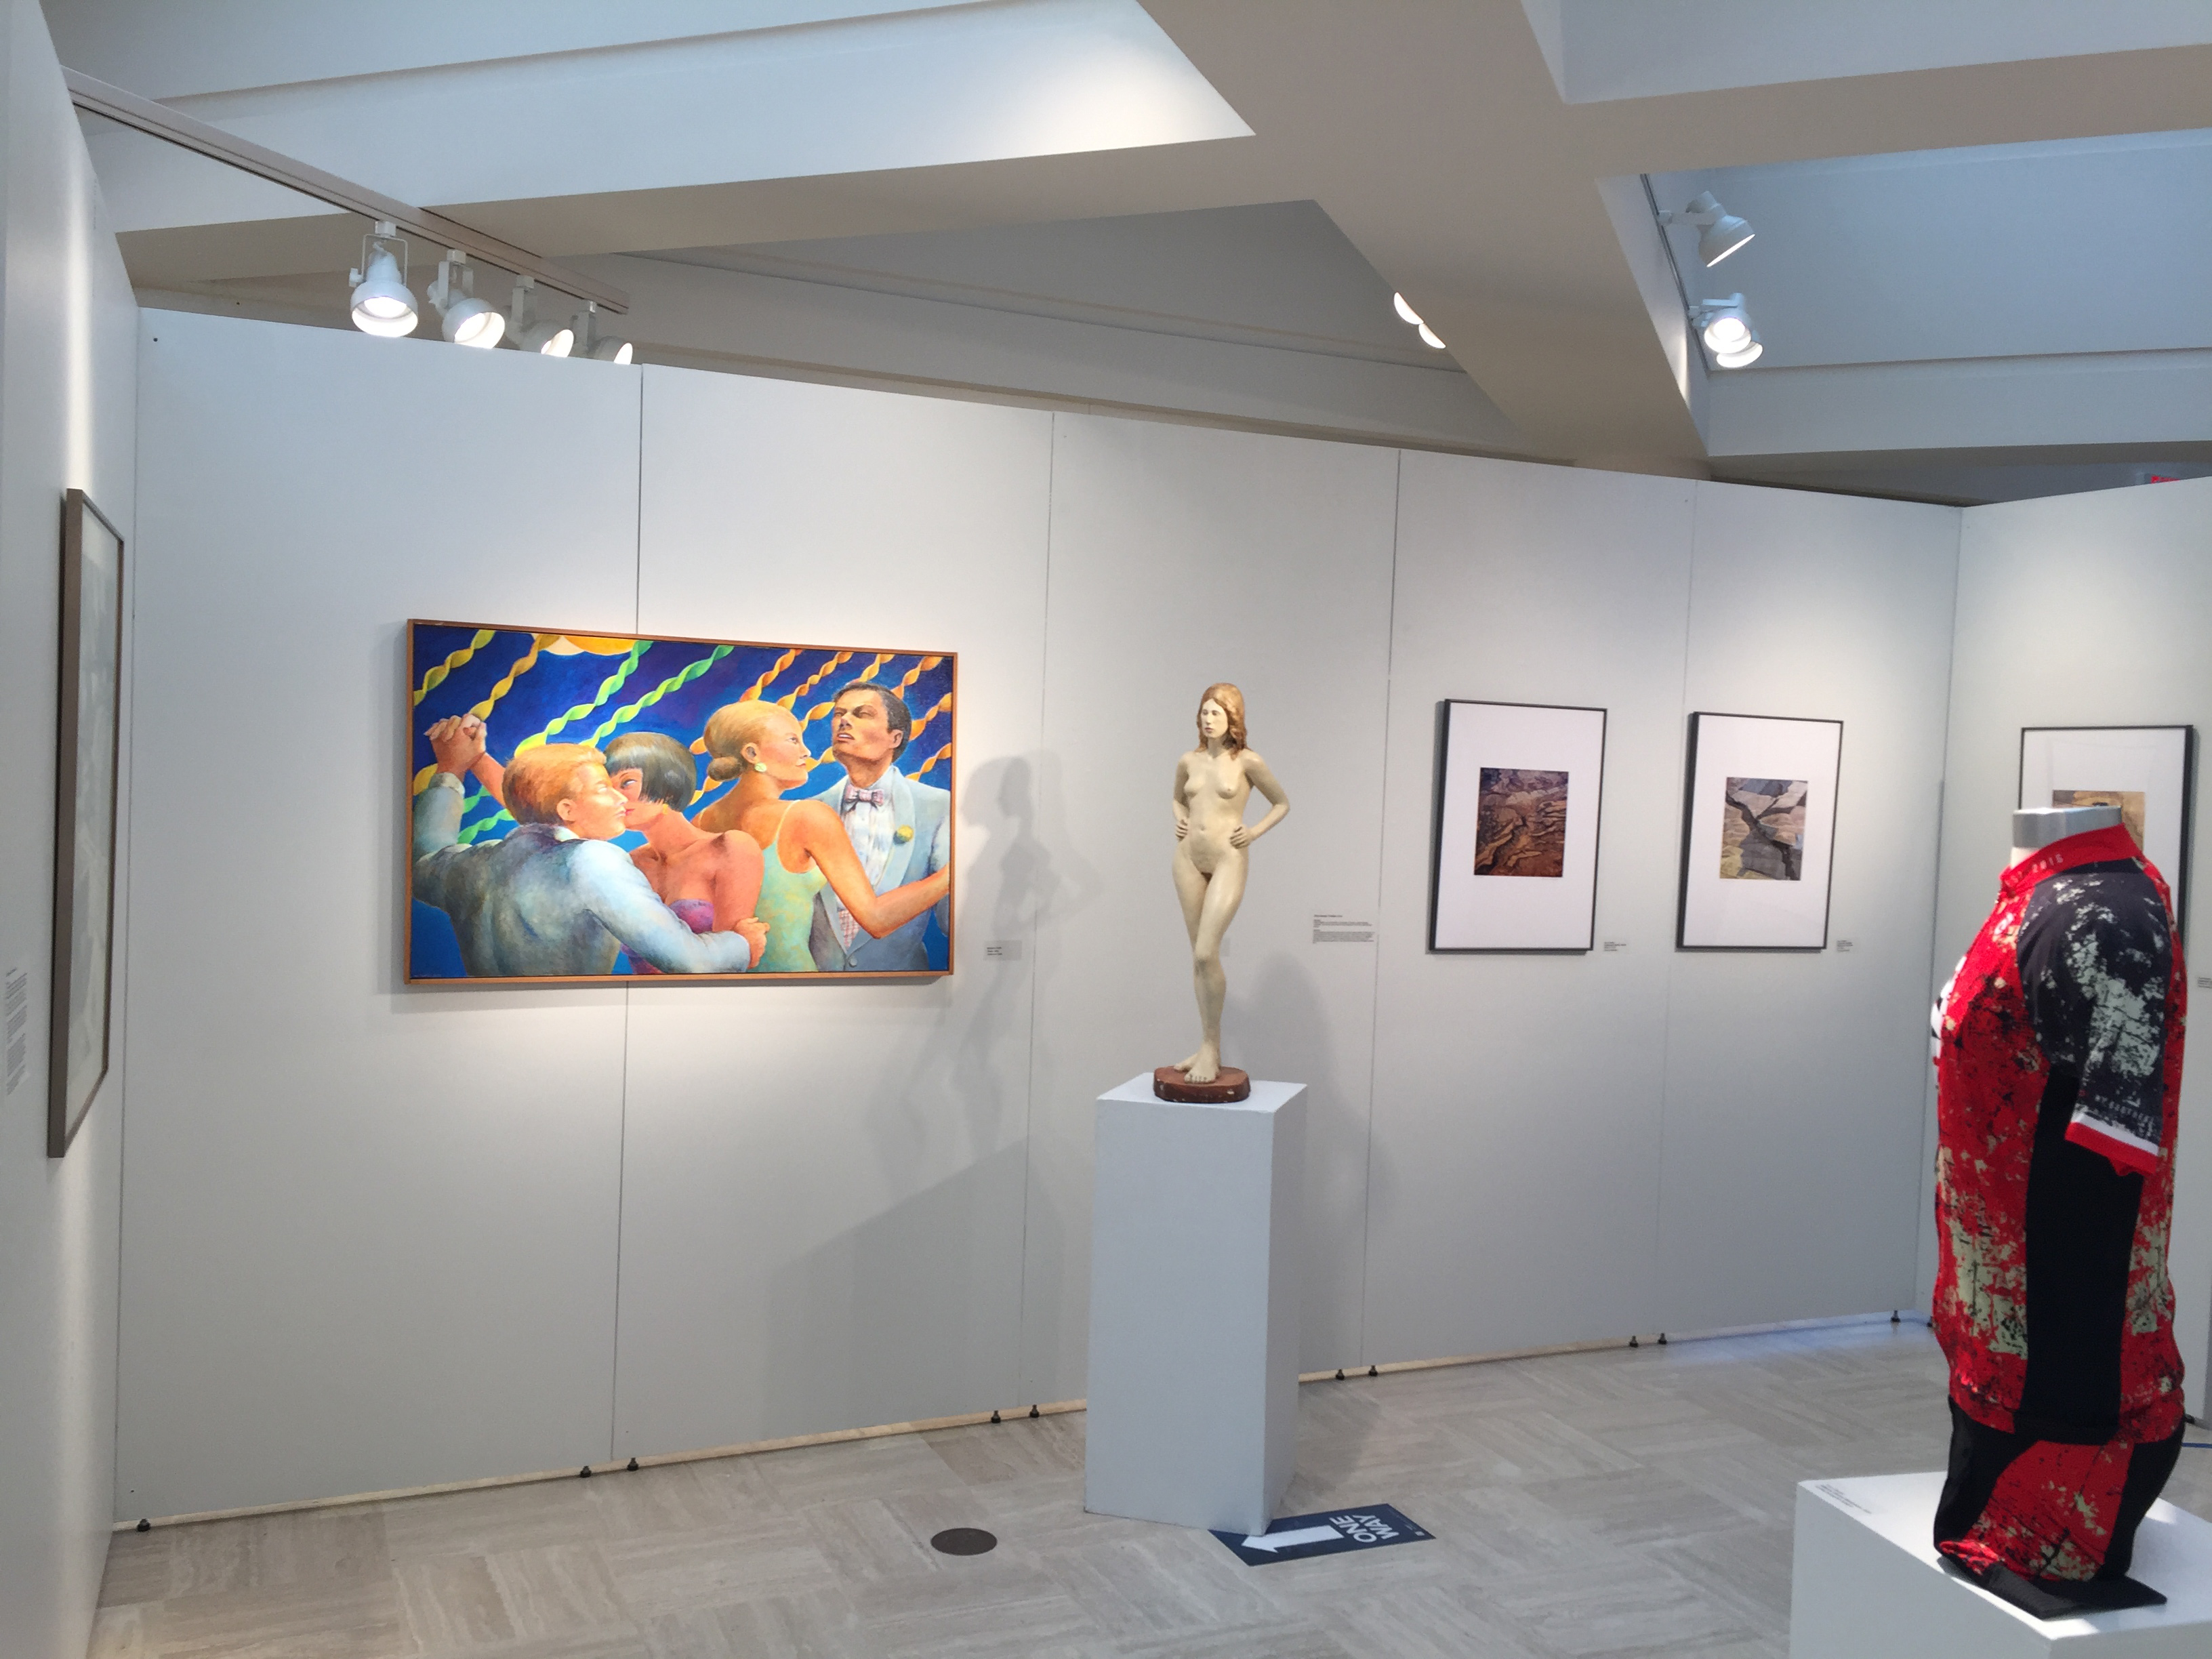 Installation view featuring Zivich, Bangert and Canale